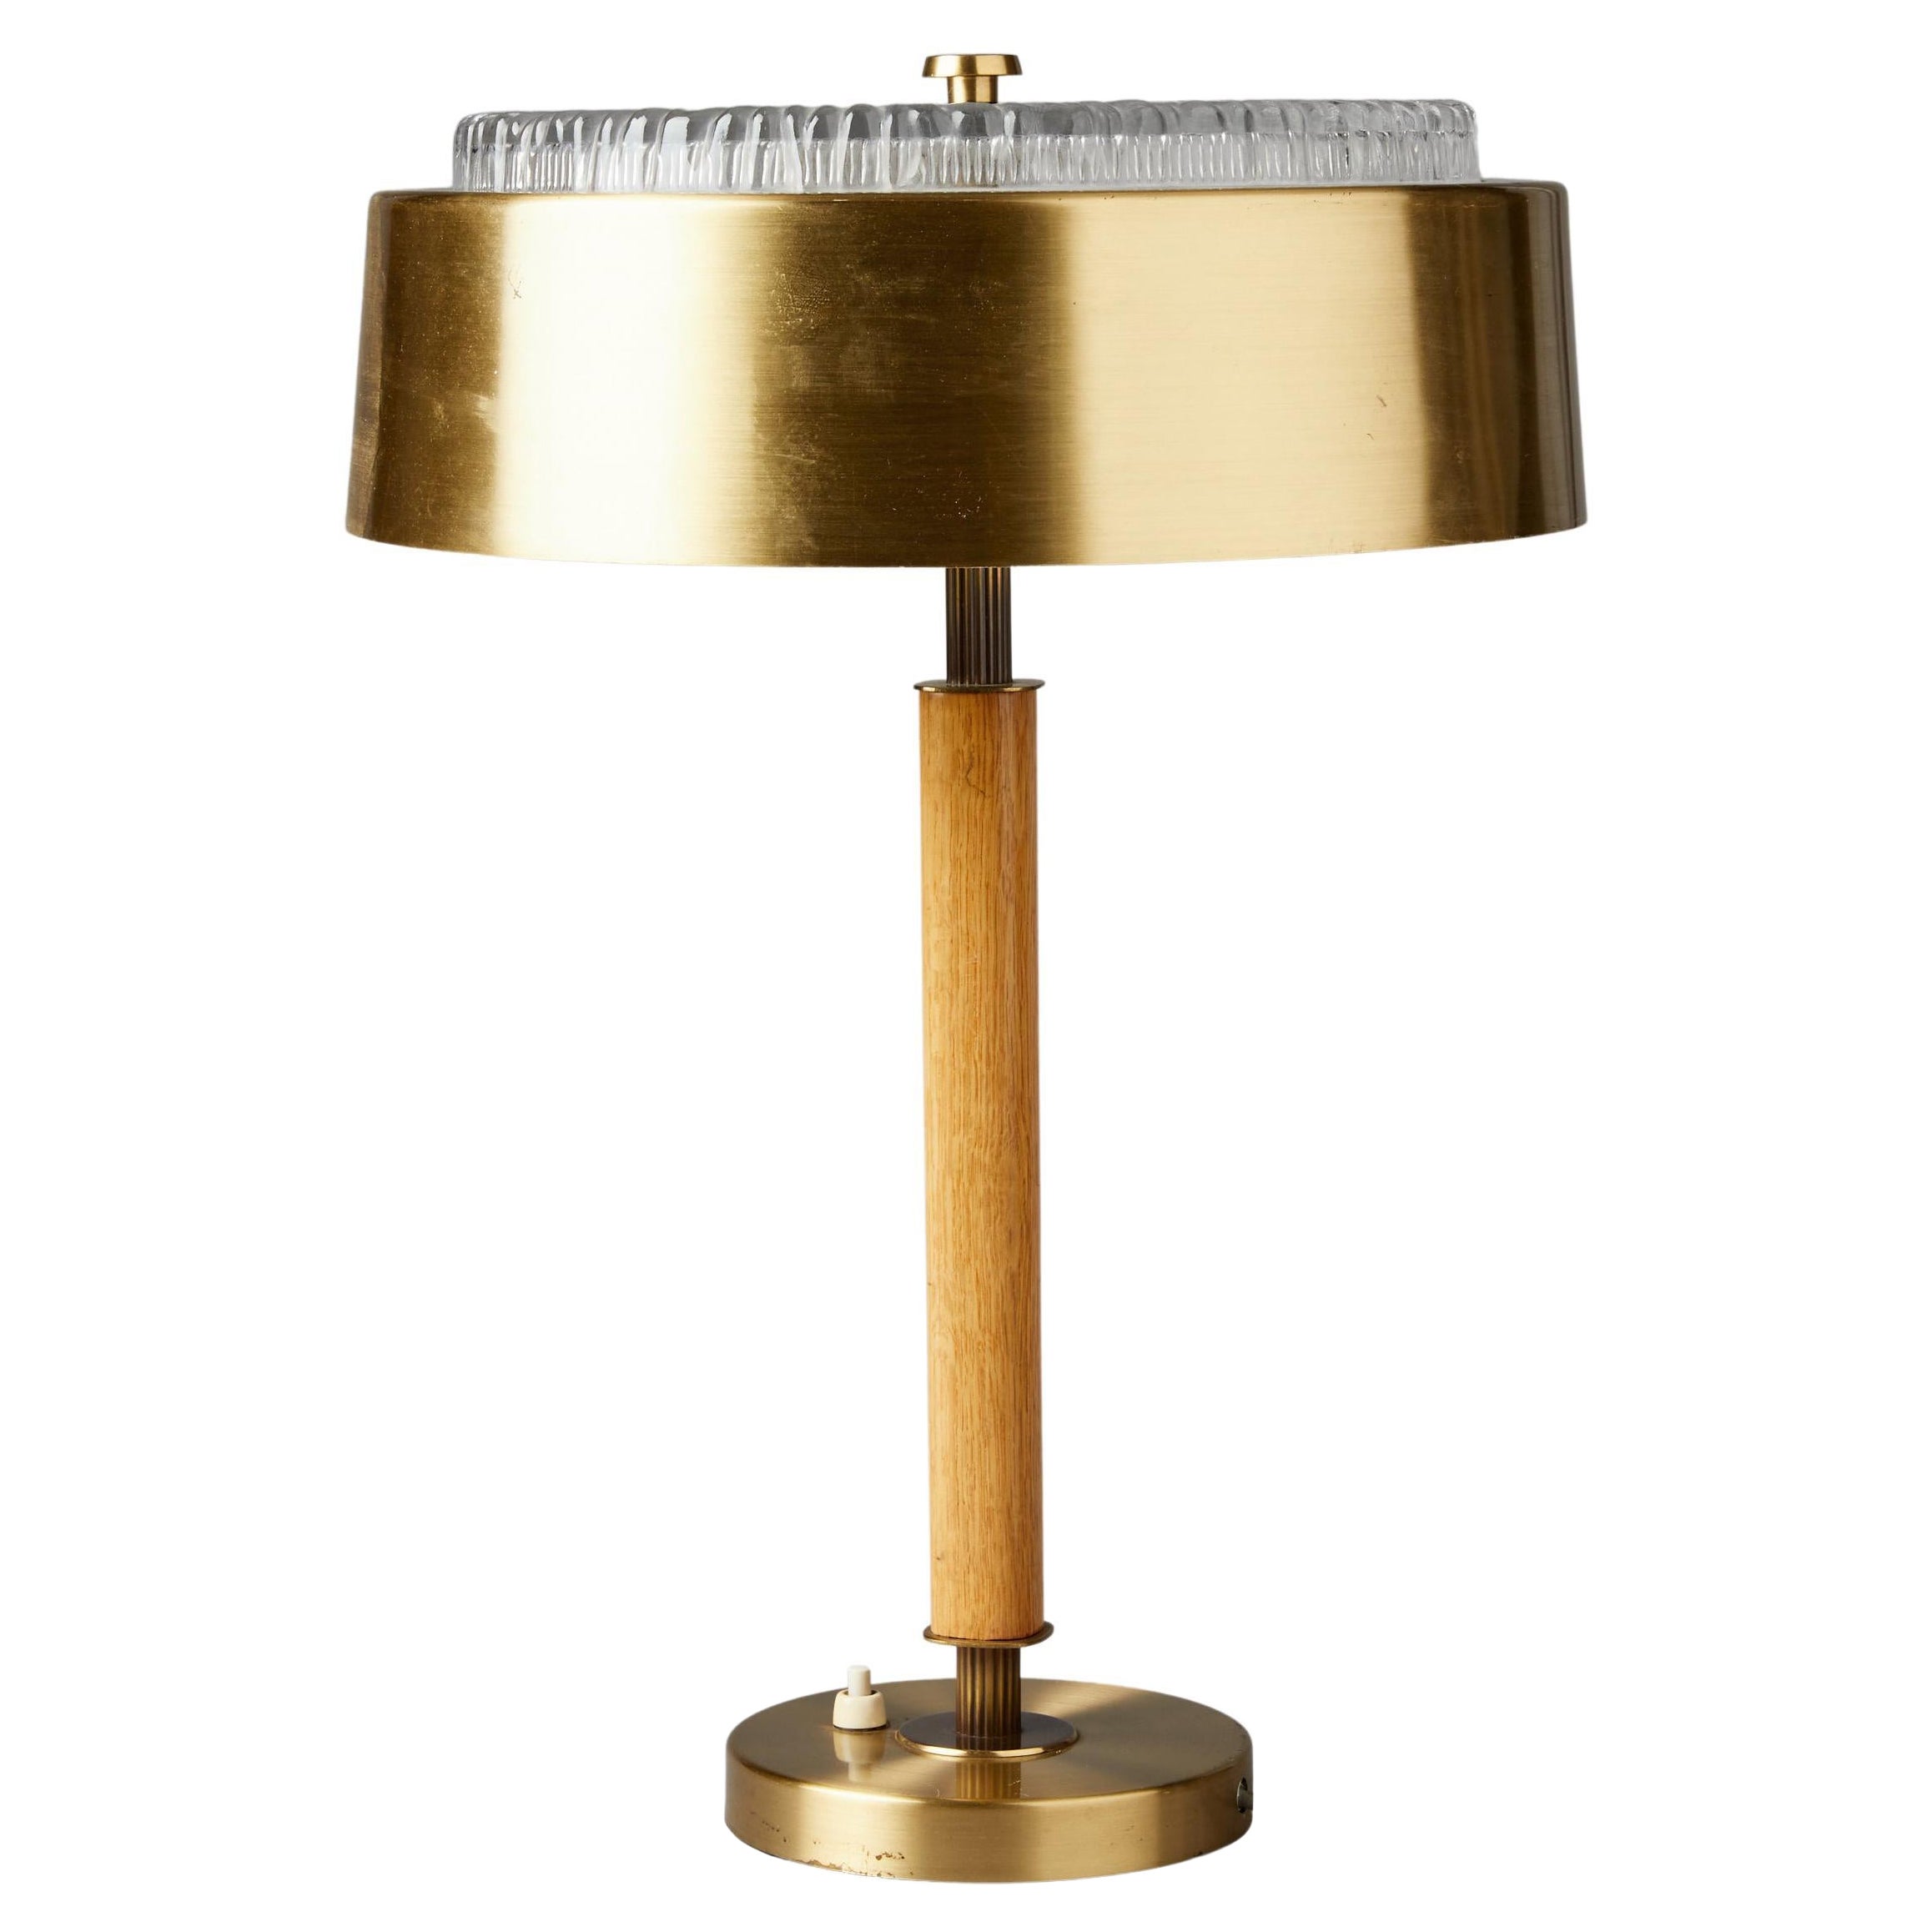 Swedish Midcentury Table Lamp in Brass, Crystal and Wood by Boréns